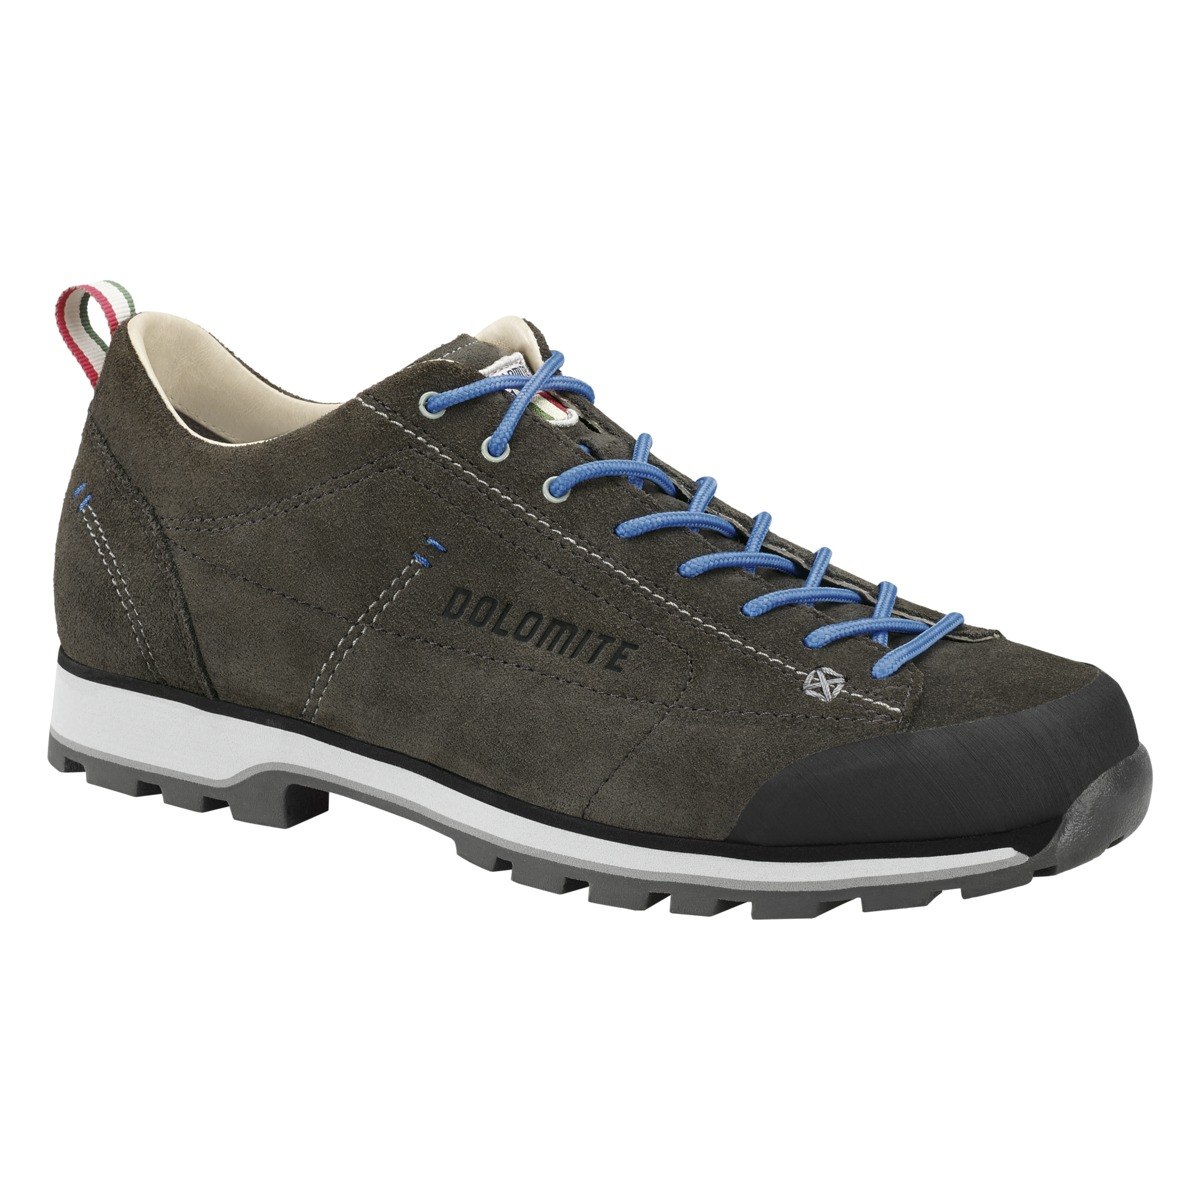 Picture of Dolomite 54 Low Shoe - Anthracite/Blue